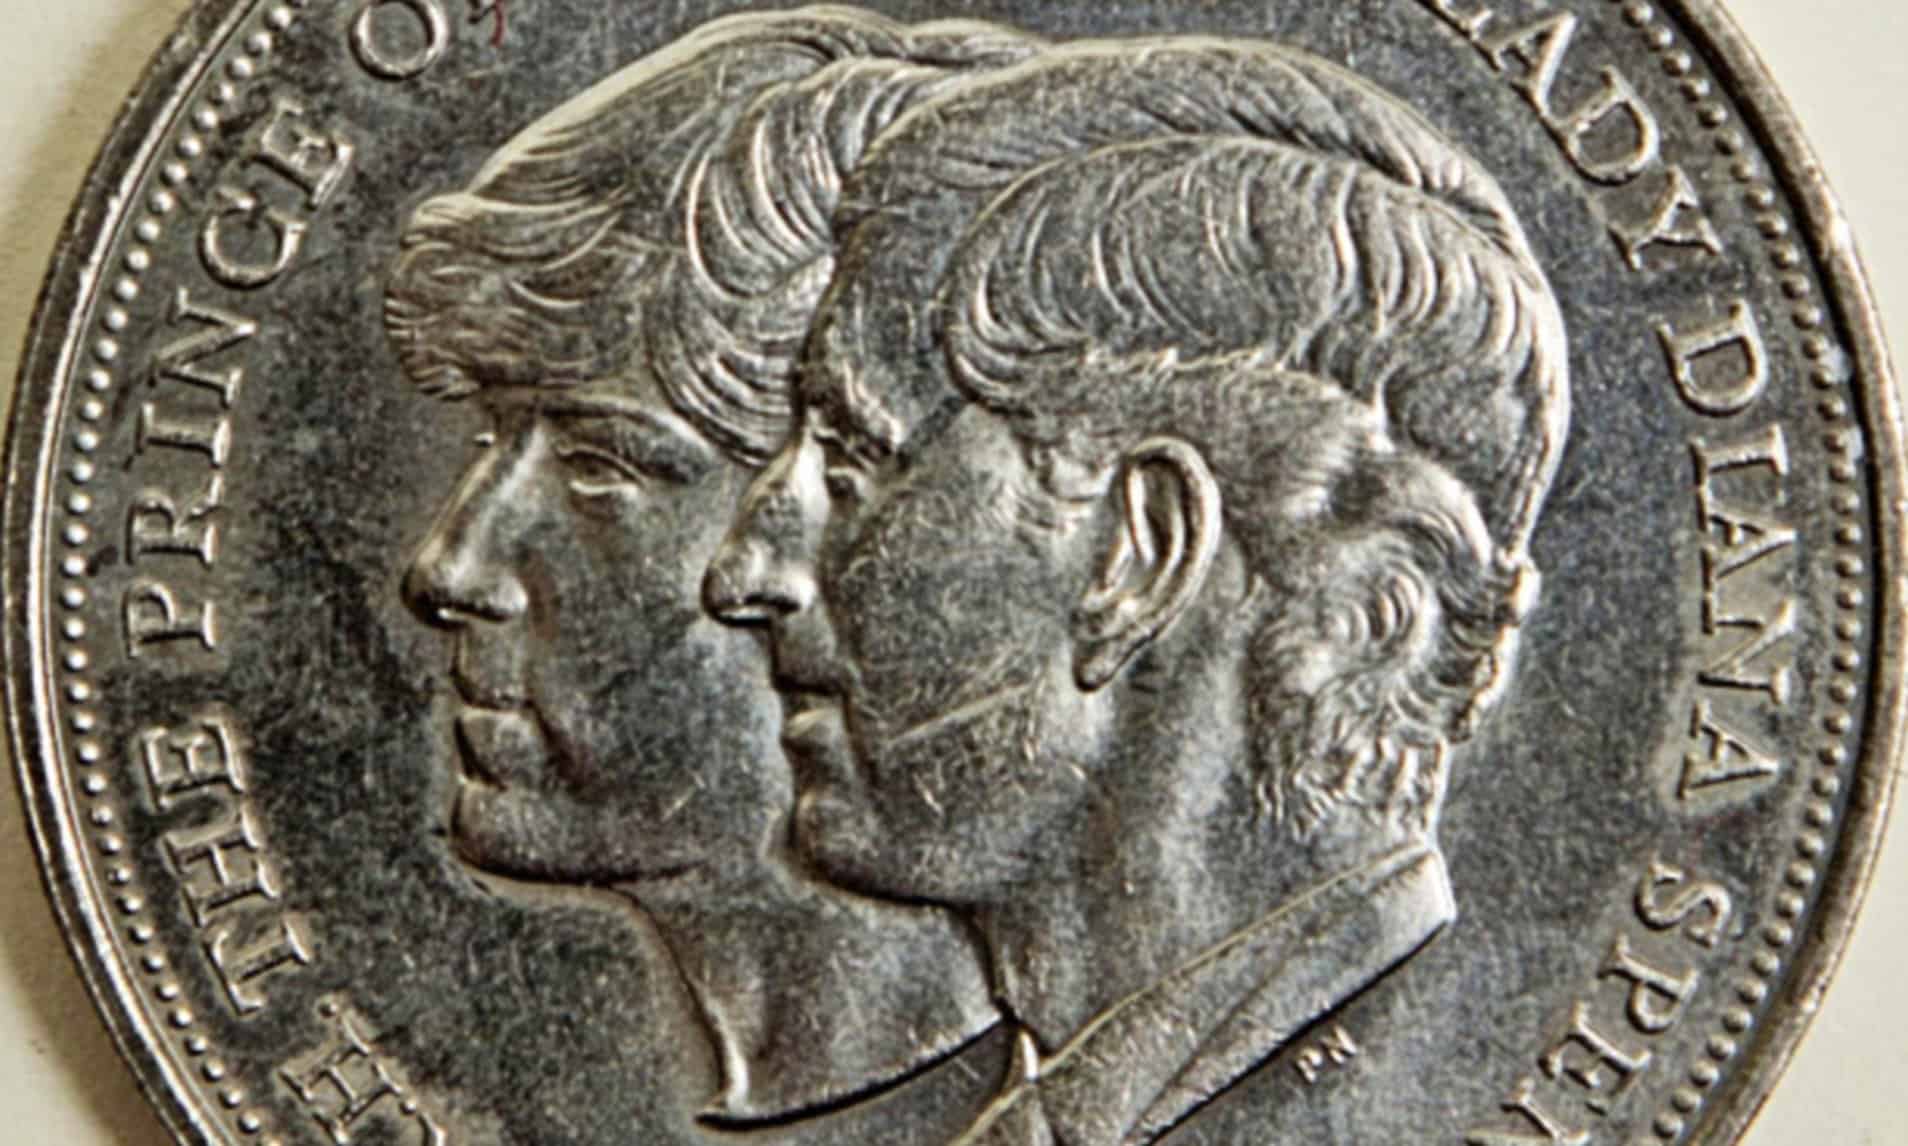 How Much is a 1981 Charles and Diana Coin Worth? | CostlyCoins